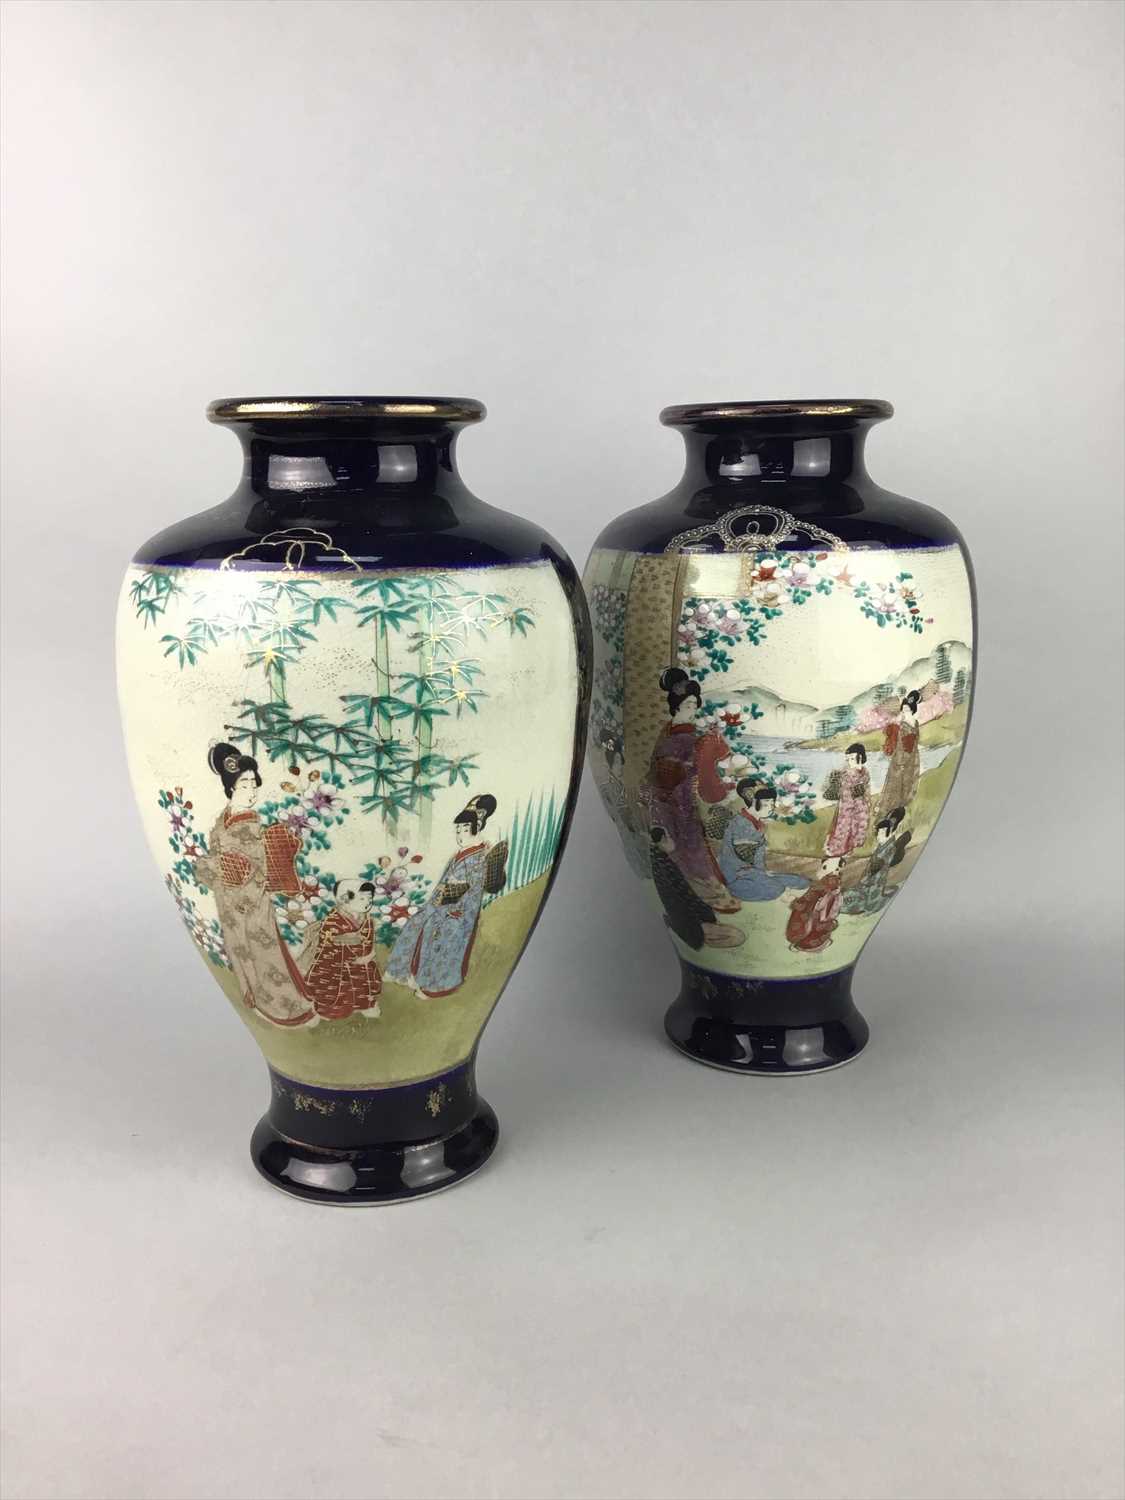 Lot 2 - A PAIR OF JAPANESE VASES